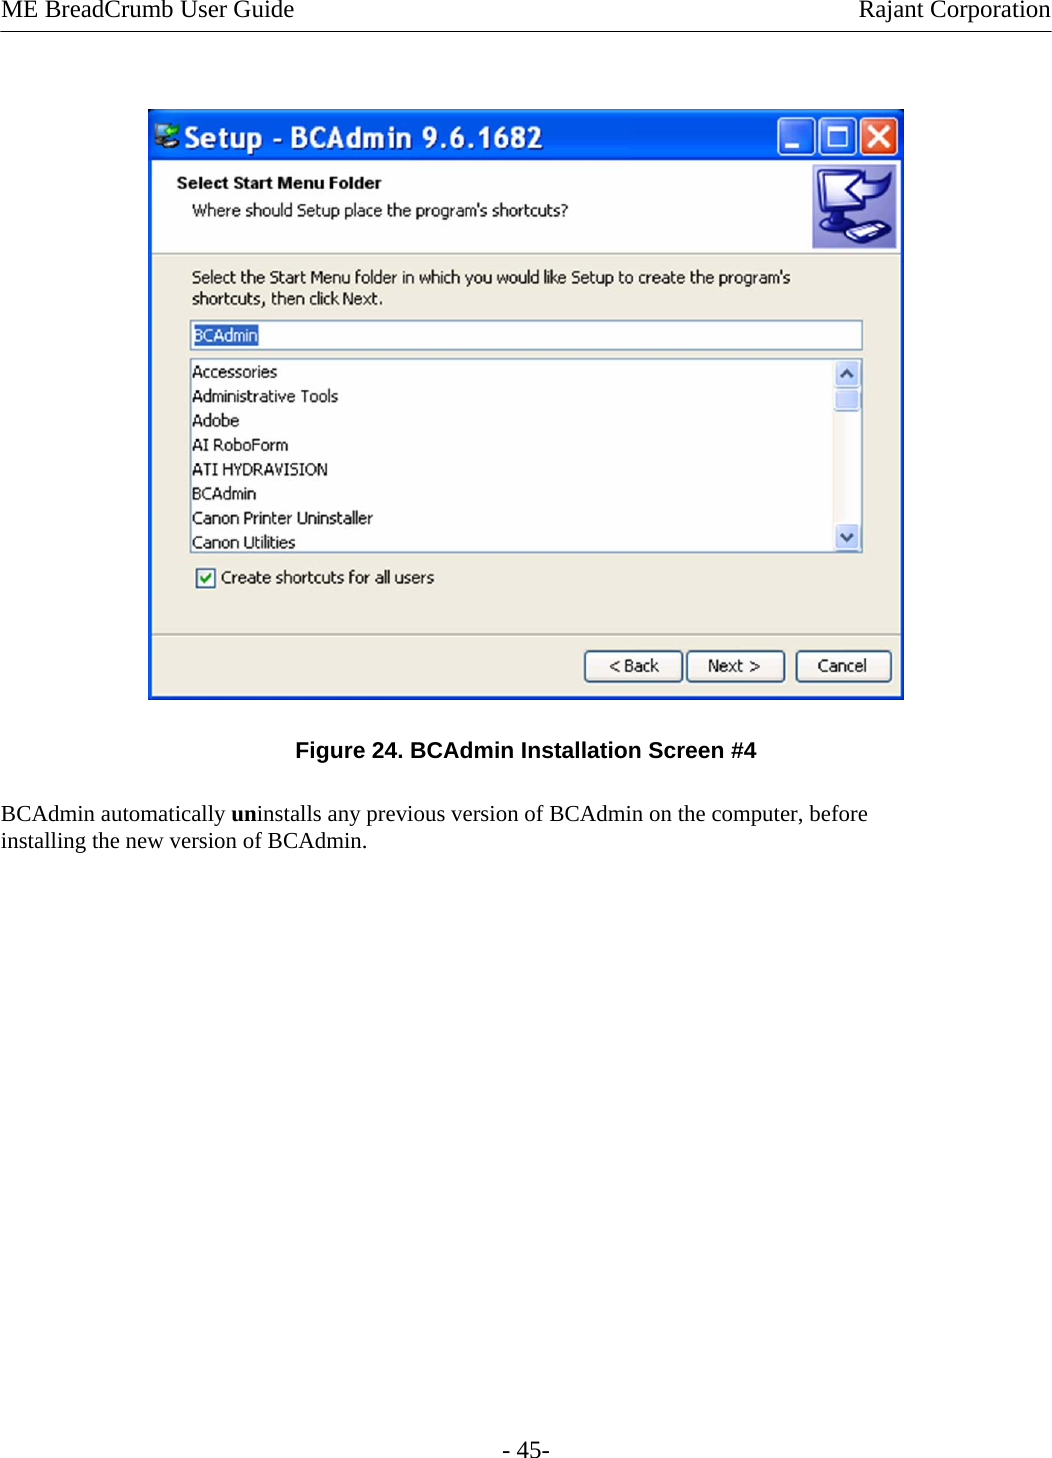 ME BreadCrumb User Guide  Rajant Corporation   Figure 24. BCAdmin Installation Screen #4 BCAdmin automatically uninstalls any previous version of BCAdmin on the computer, before installing the new version of BCAdmin. - 45- 